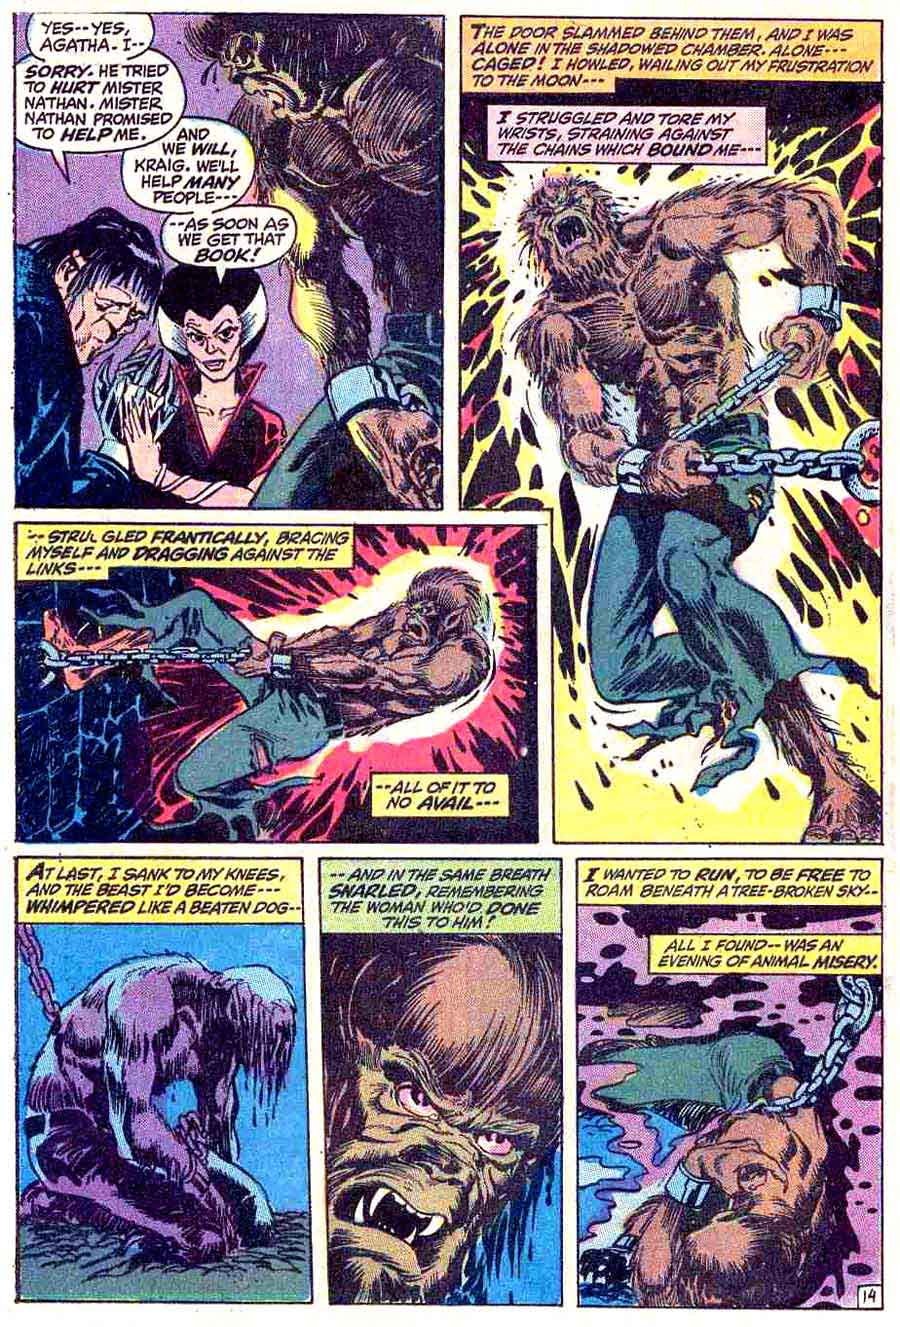 Marvel Spotlight #3 Werewolf by Night / bronze age 1970s marvel comic book page art by Mike Ploog